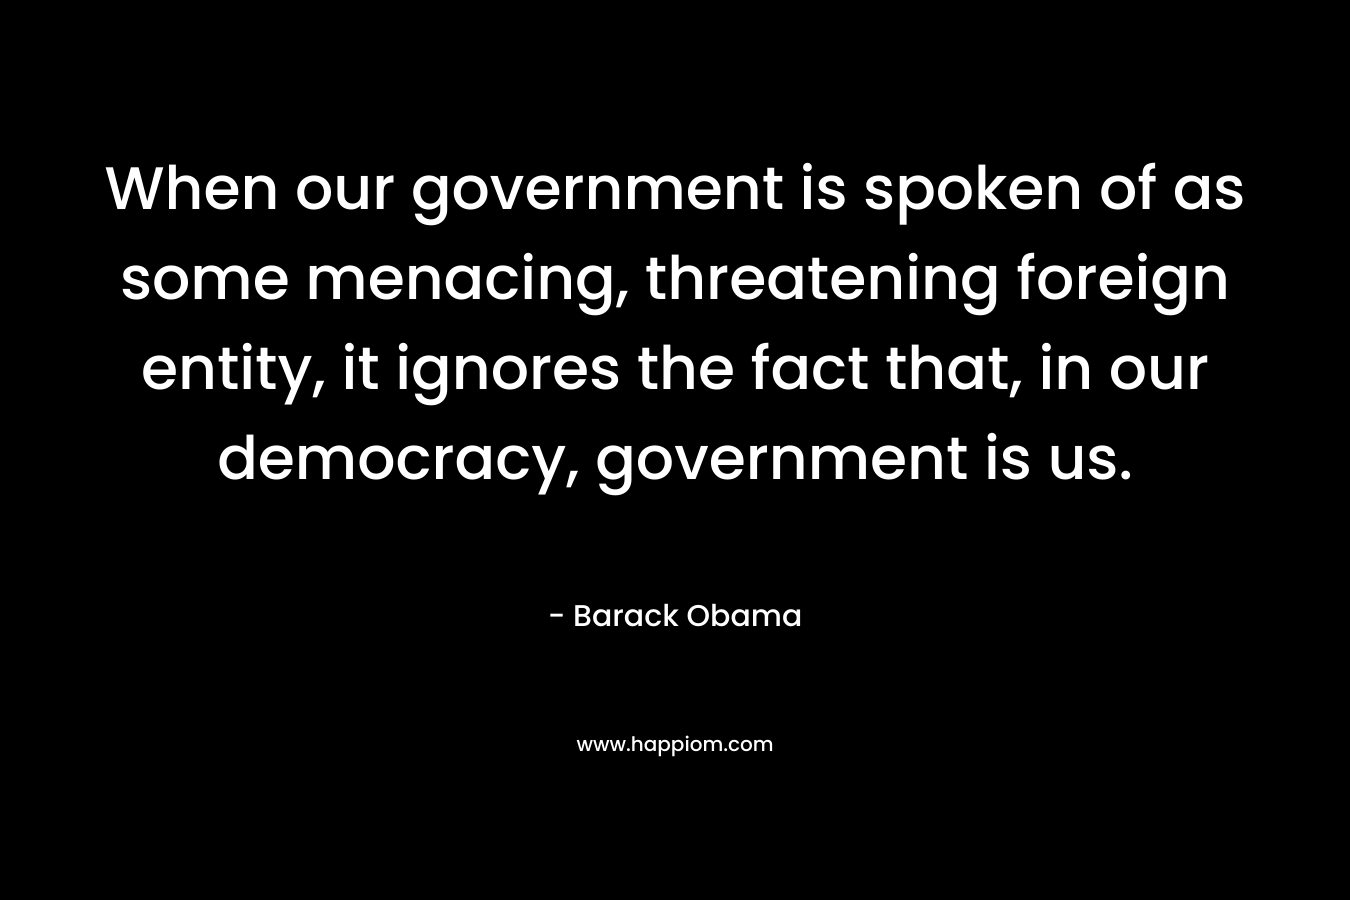 When our government is spoken of as some menacing, threatening foreign entity, it ignores the fact that, in our democracy, government is us. – Barack Obama